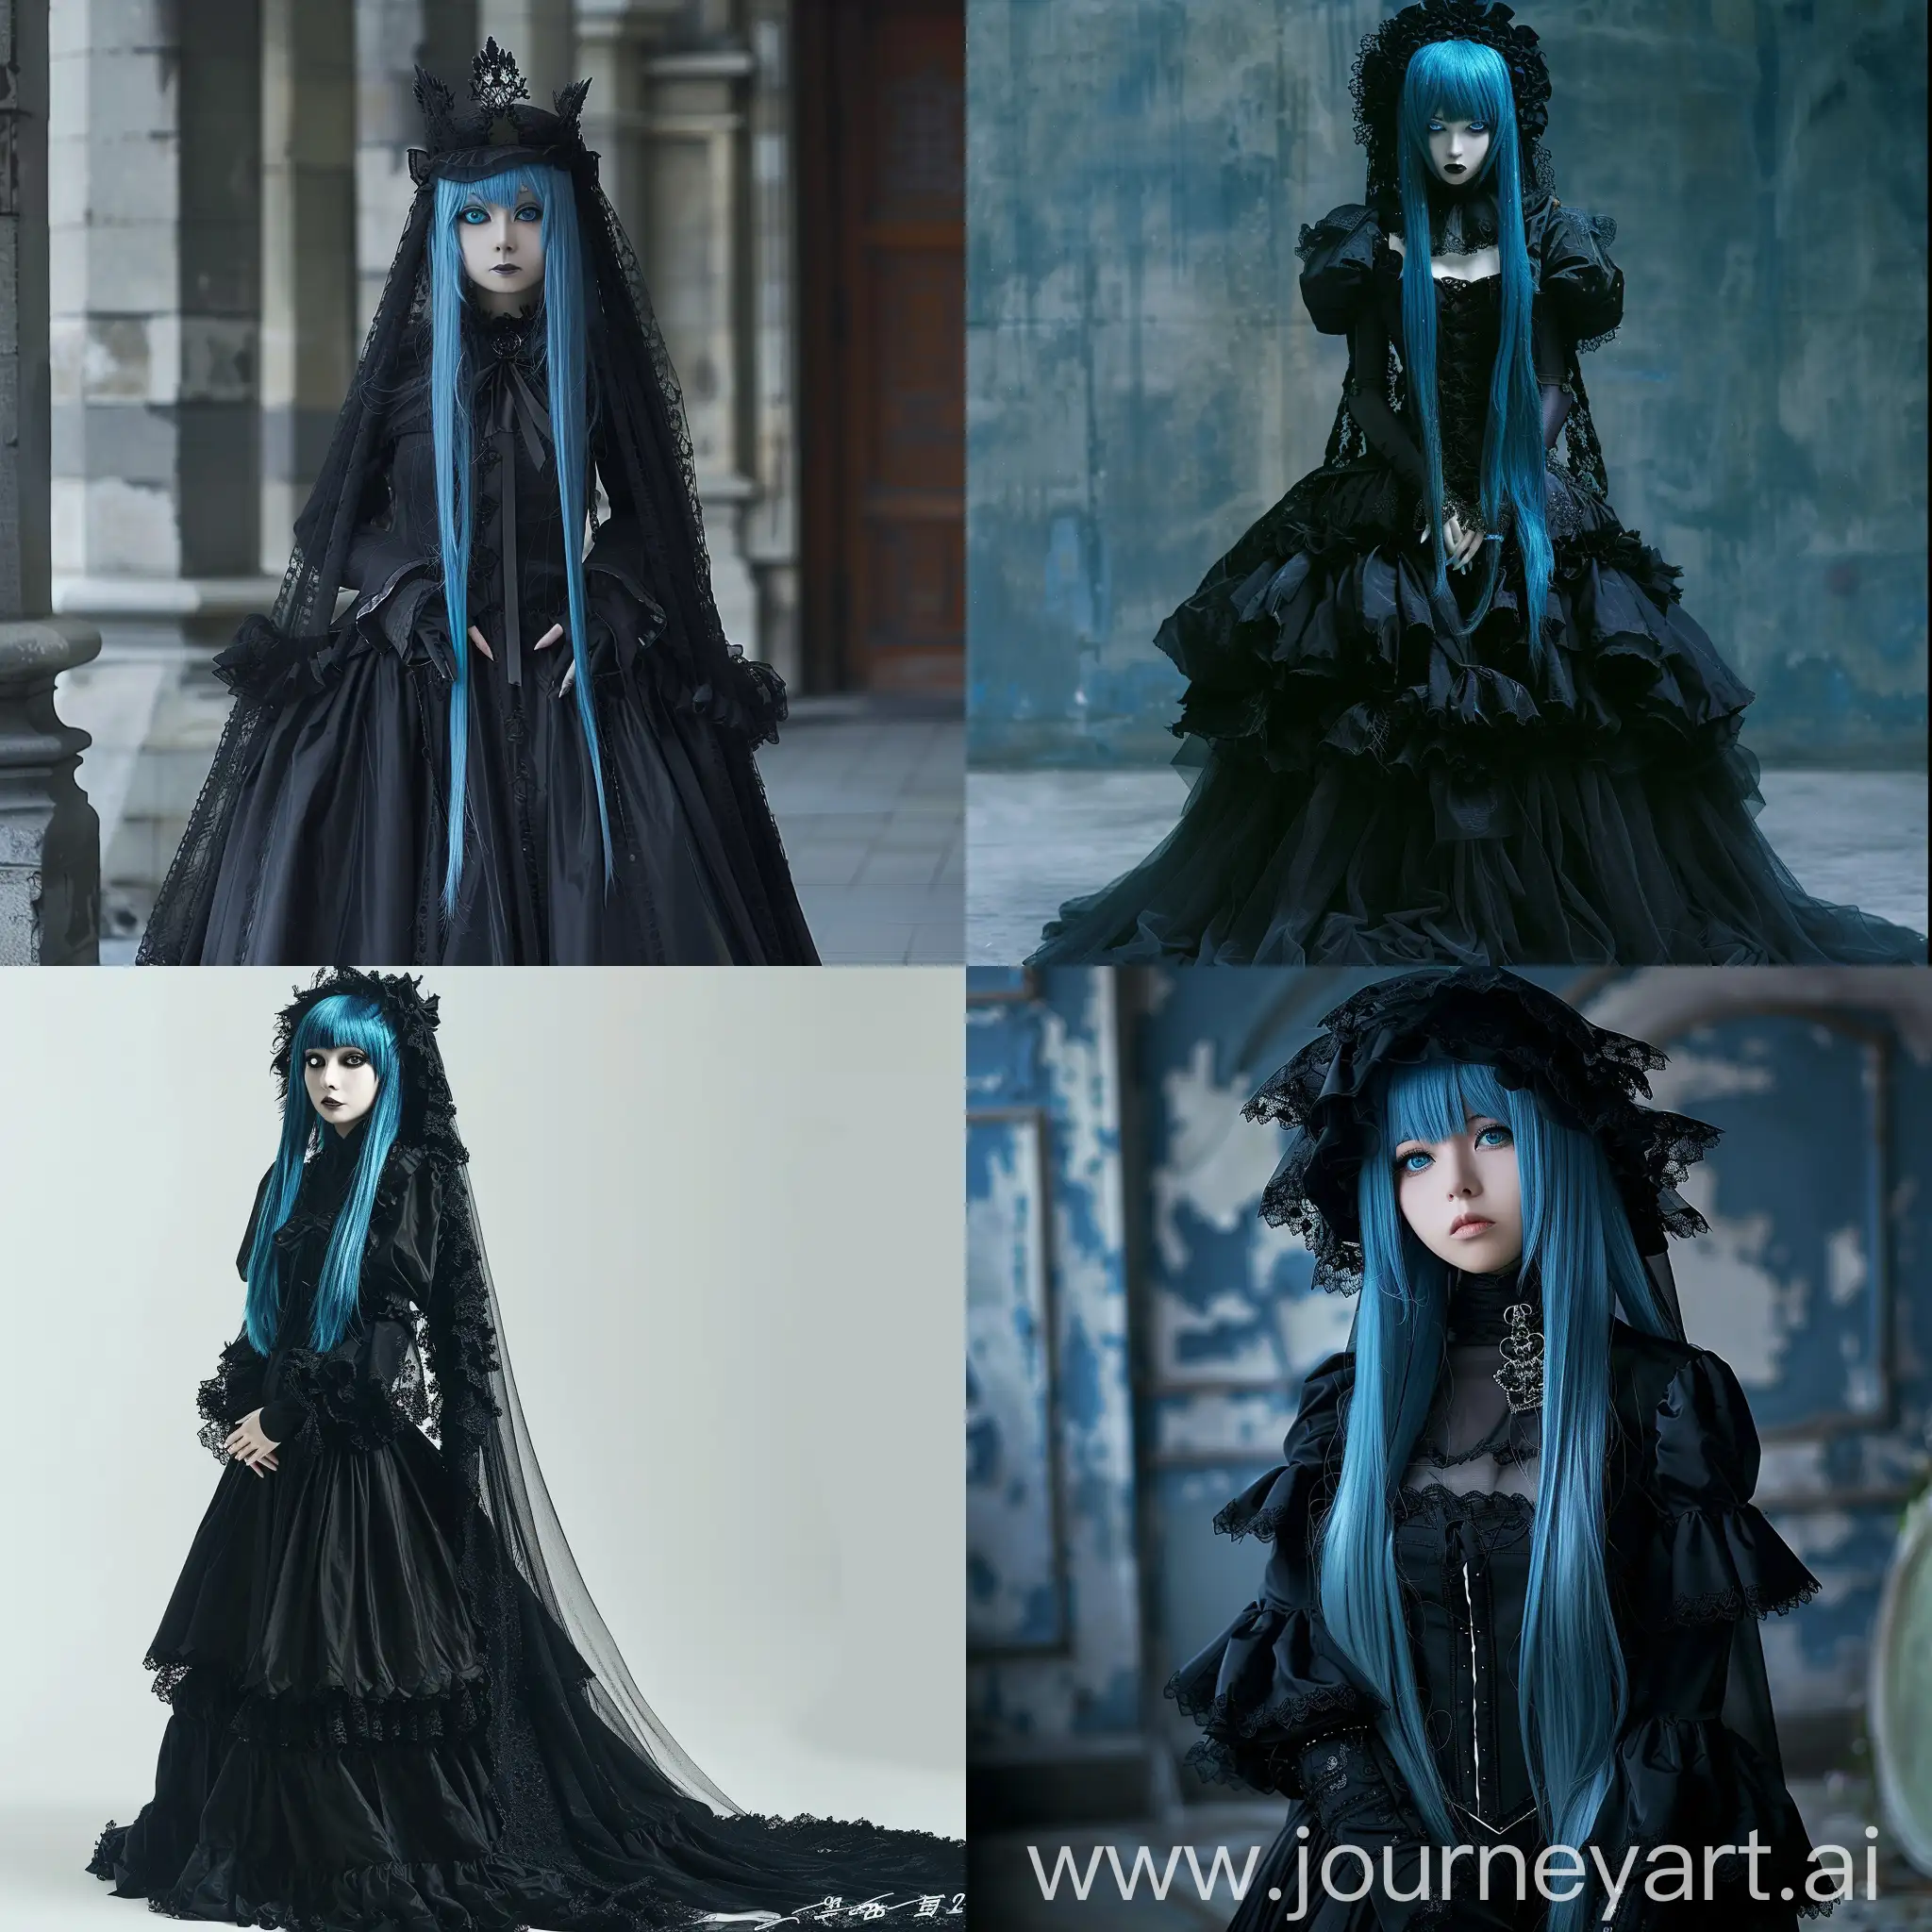 Mysterious-Anime-Woman-with-Blue-Hair-in-Elegant-Black-Attire